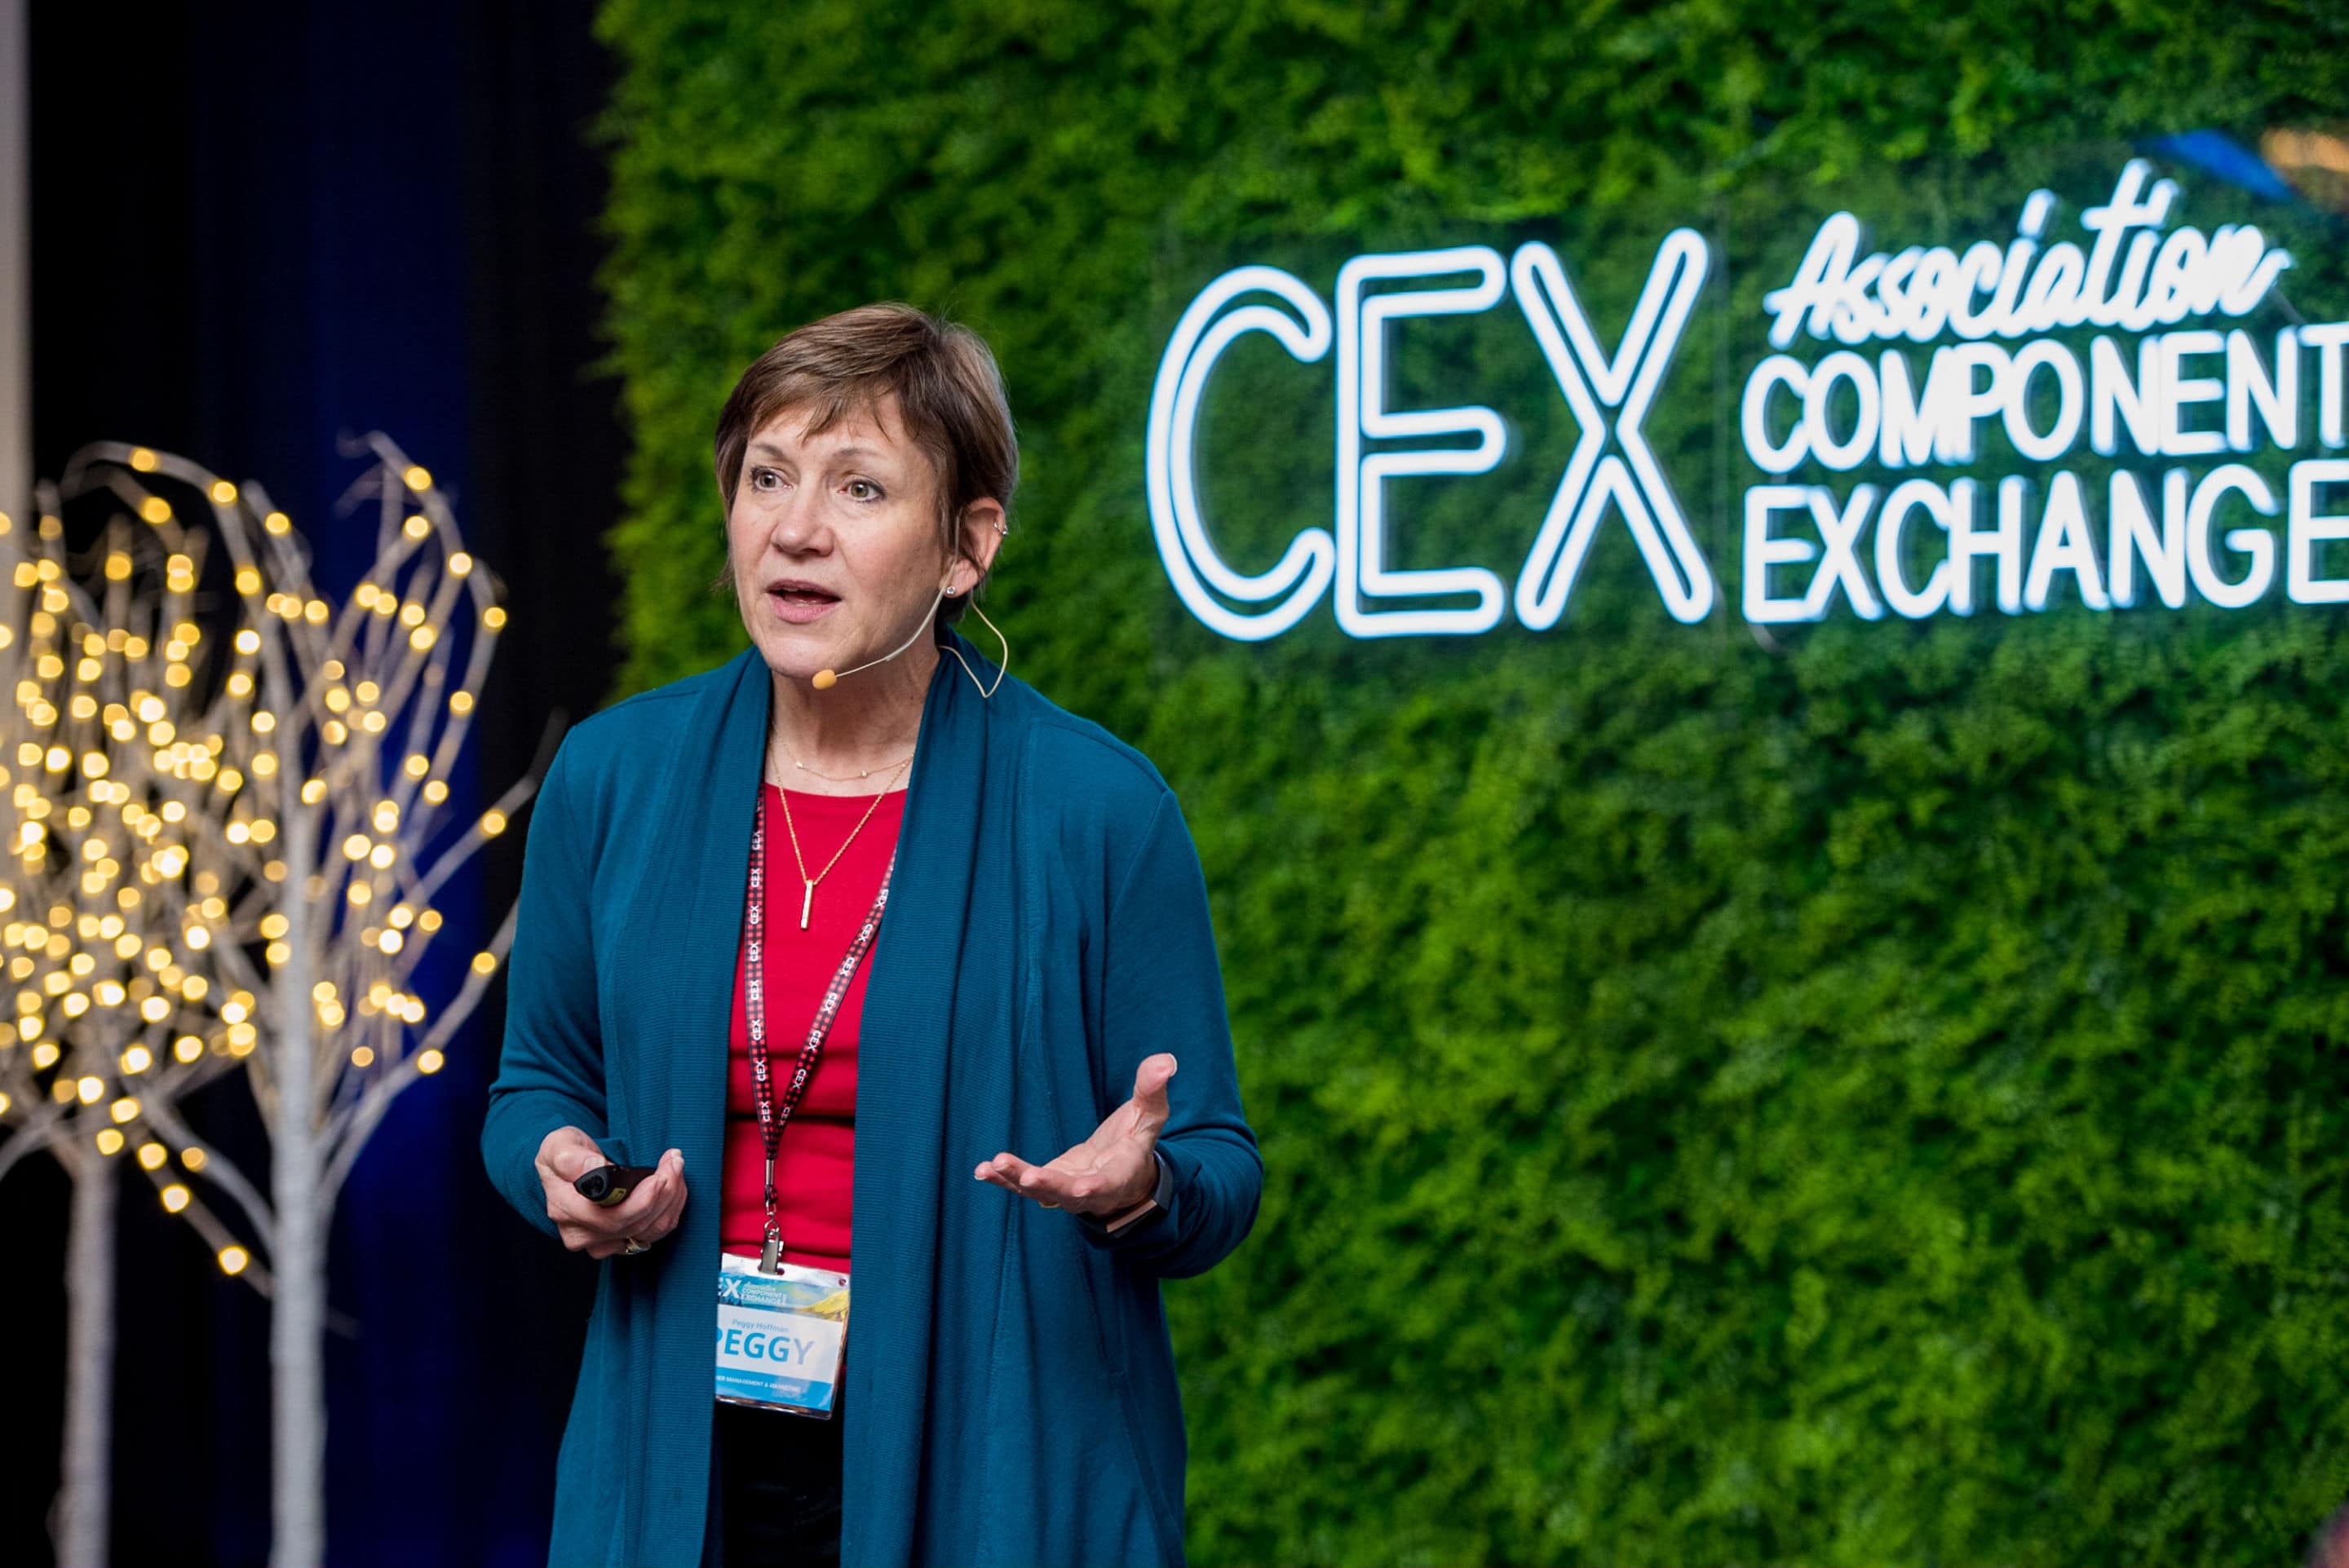 We Talked Chapters at CEX: The Association Component Exchange